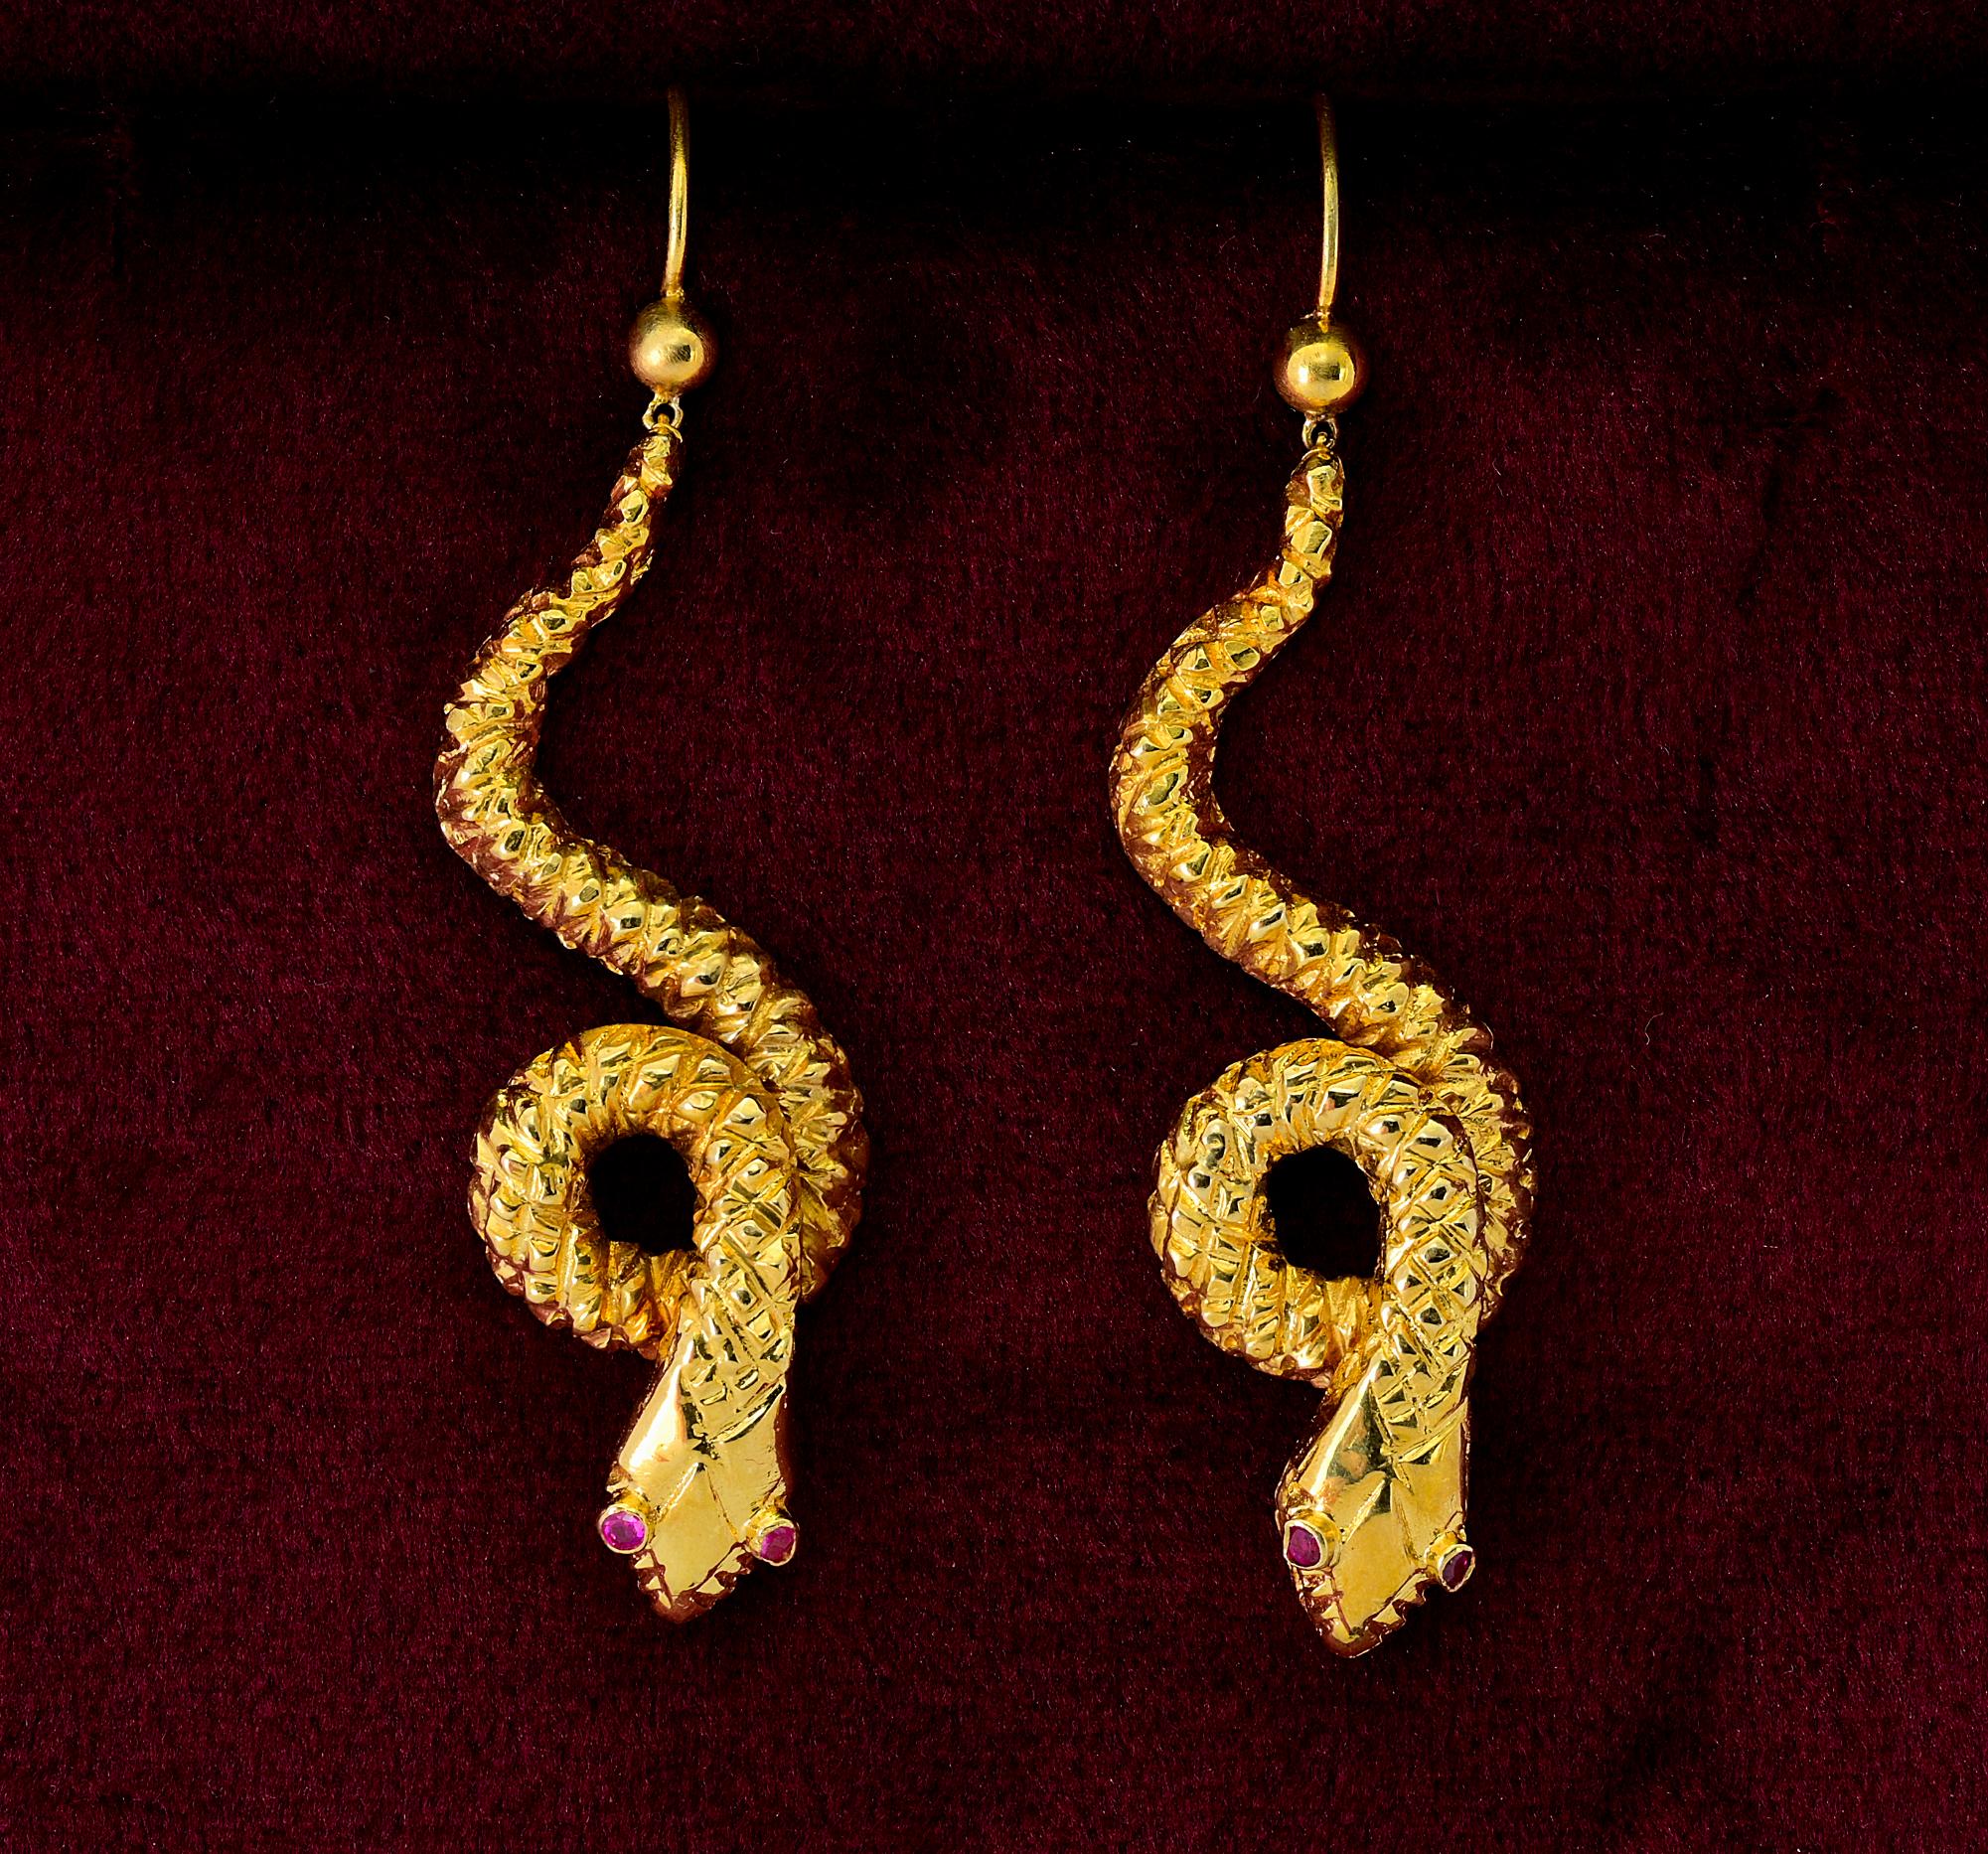 A charming pair of Victorian Style 18 KT coiled snake earring symbolizing eternity in the ancient tradition
Realistically skin textured on the front side set with Ruby eyes
They weigh 10.4 grams of 18 KT gold
Measures: including wire 49 x 13 mm. -